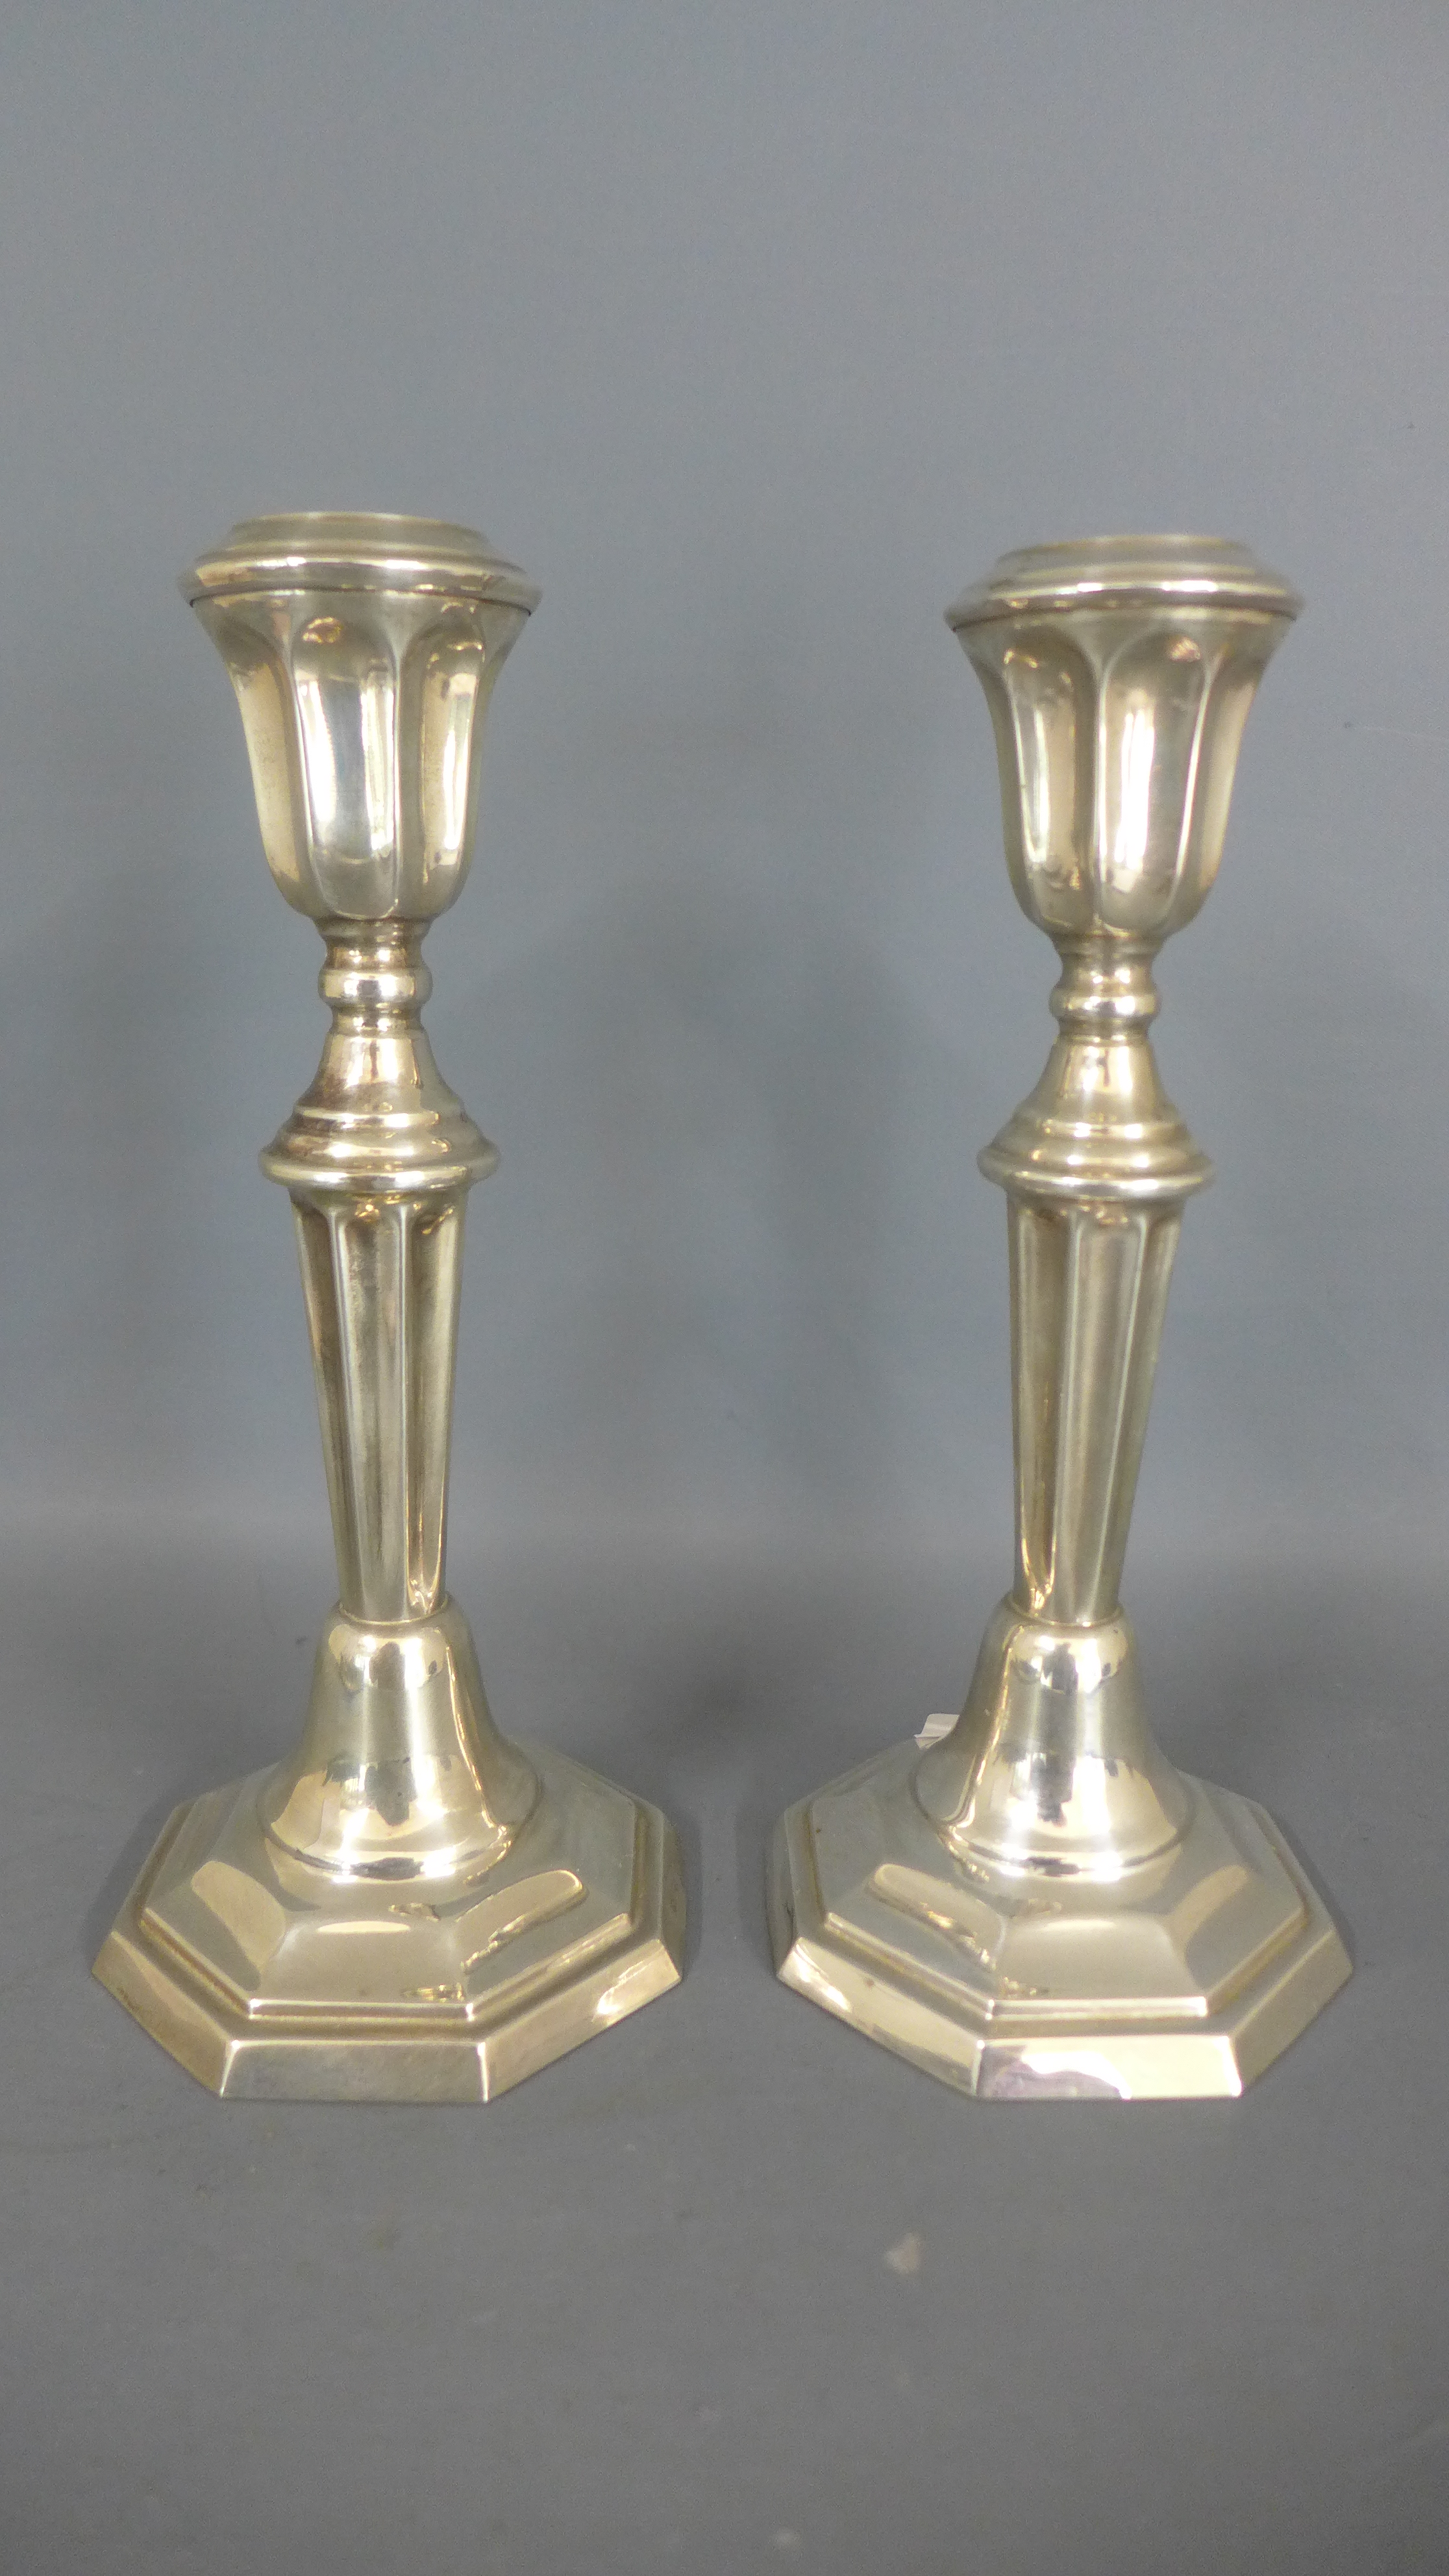 A pair of 925 silver candlesticks with weighted bases - Height 18cm - in good condition